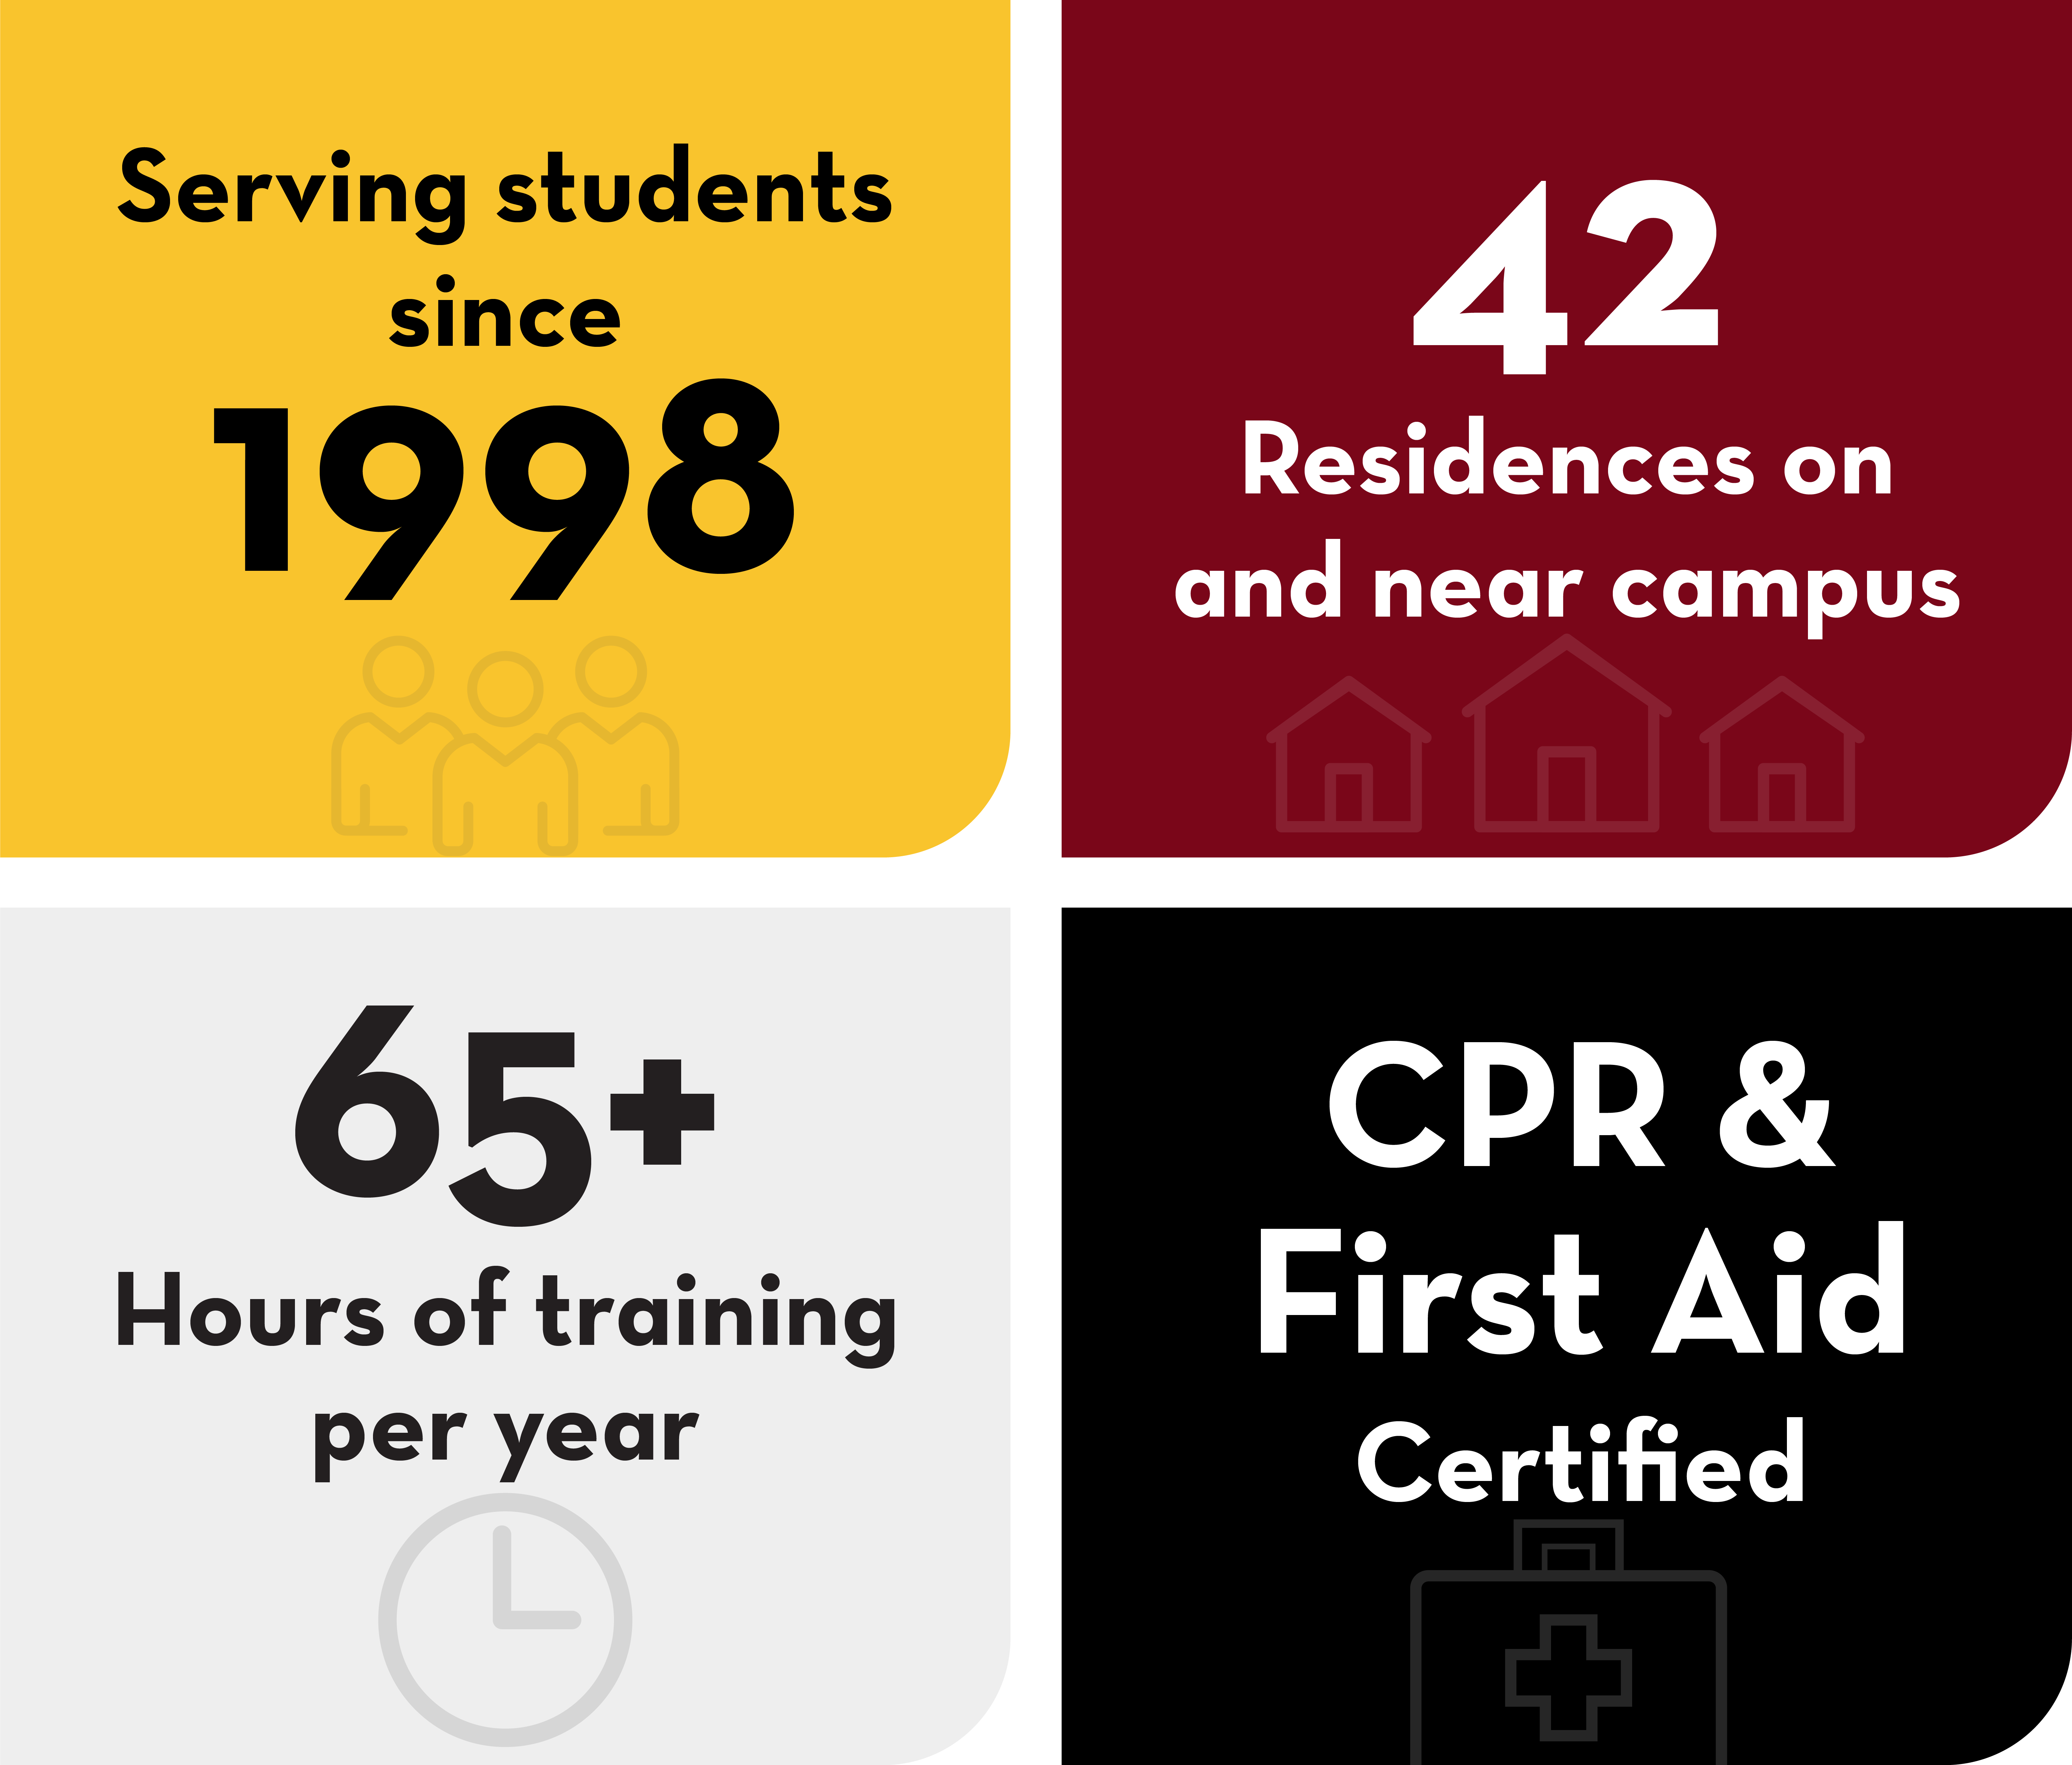 Health Advocates by the numbers: Serving students since 1998; 42 Residences on and near campus; 65+ Hours of training per year; CPR & First Aid Certified